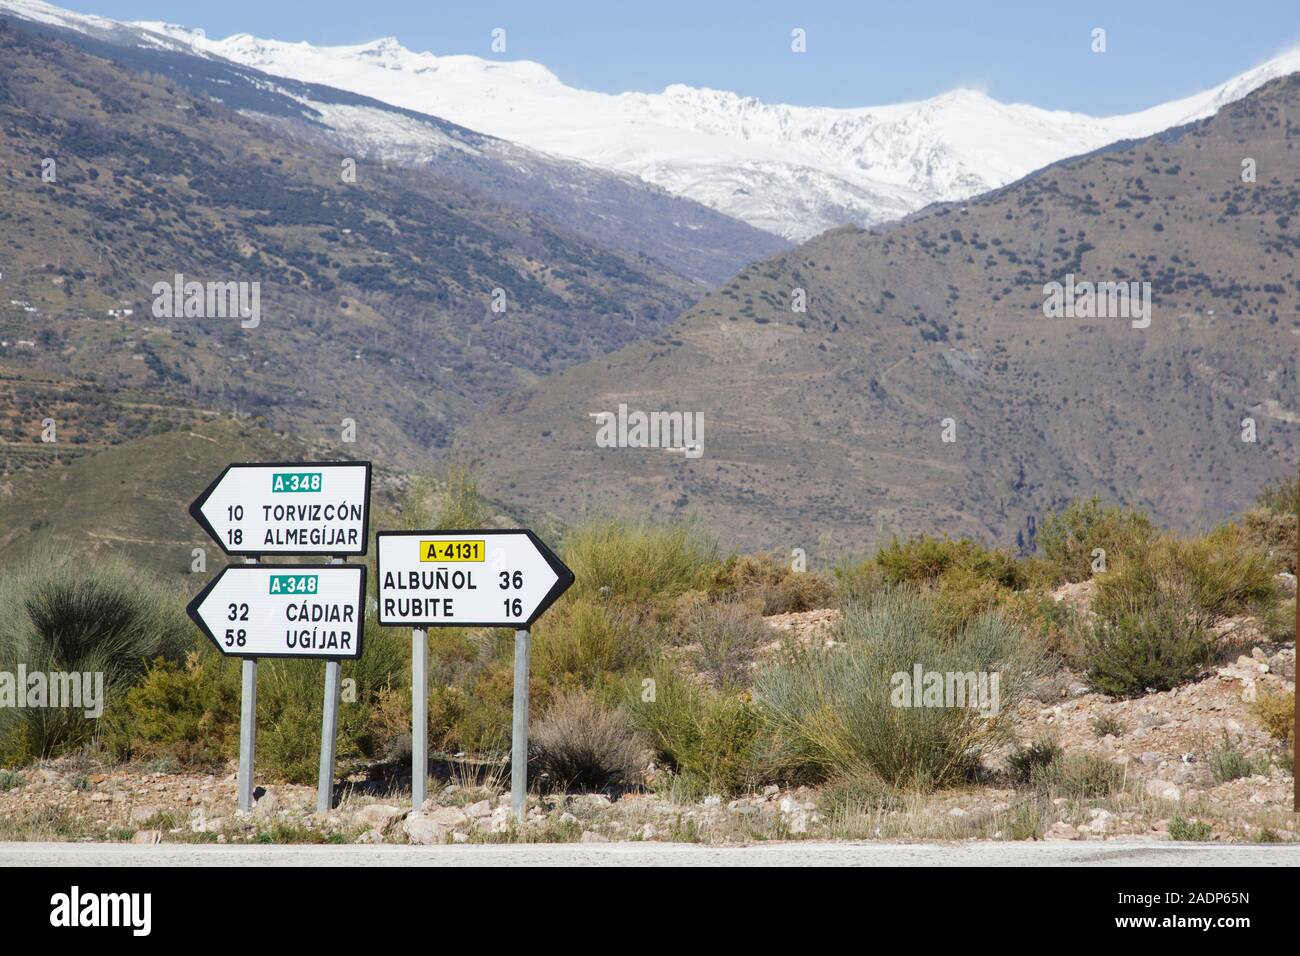 Road signs on the scenic A-348 road through the Alpujarra Valley between Órgiva and Torvizcón, Andalusia, Spain. Stock Photo